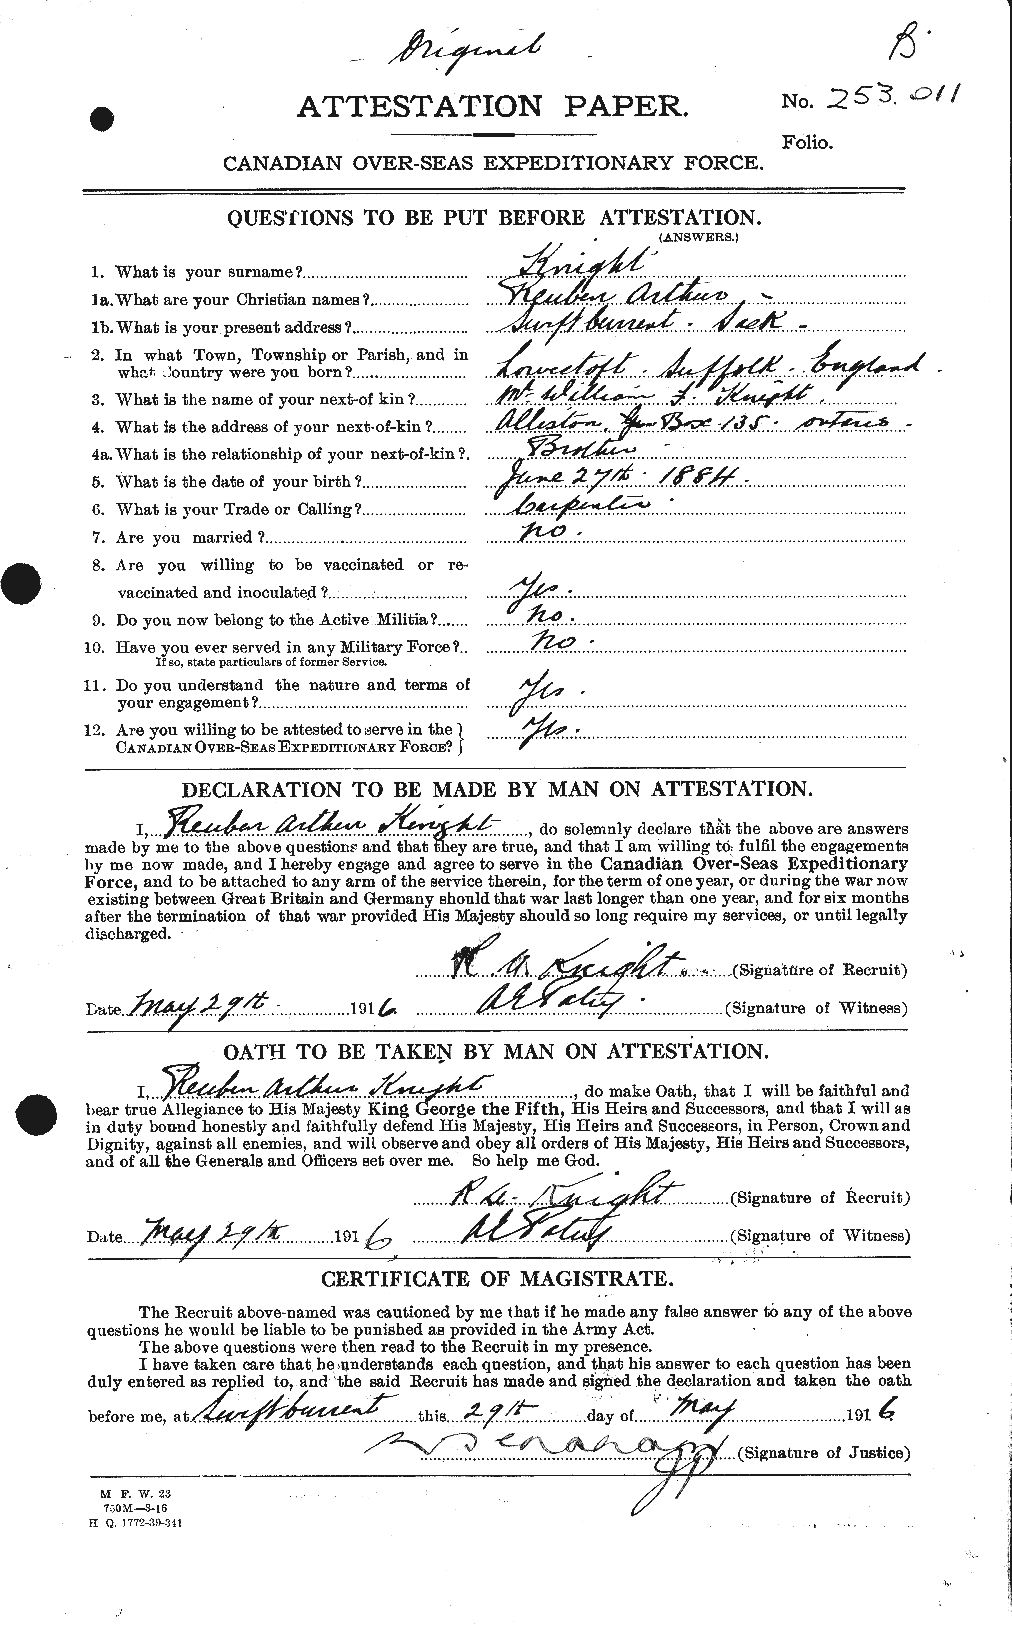 Personnel Records of the First World War - CEF 438436a